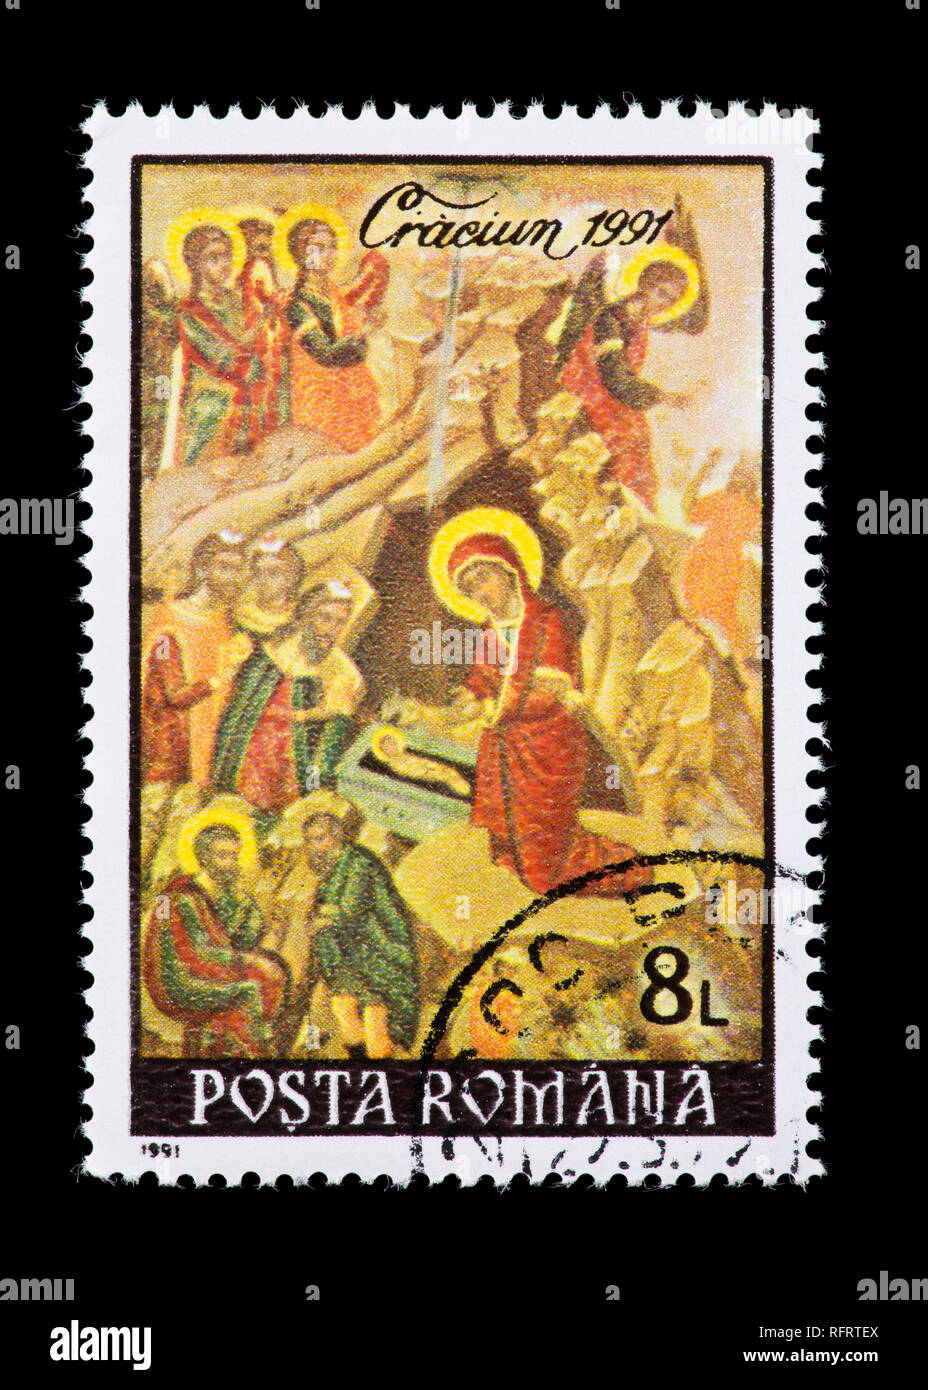 Postage stamp from Romania depicting the Christmas manger scene. Stock Photo